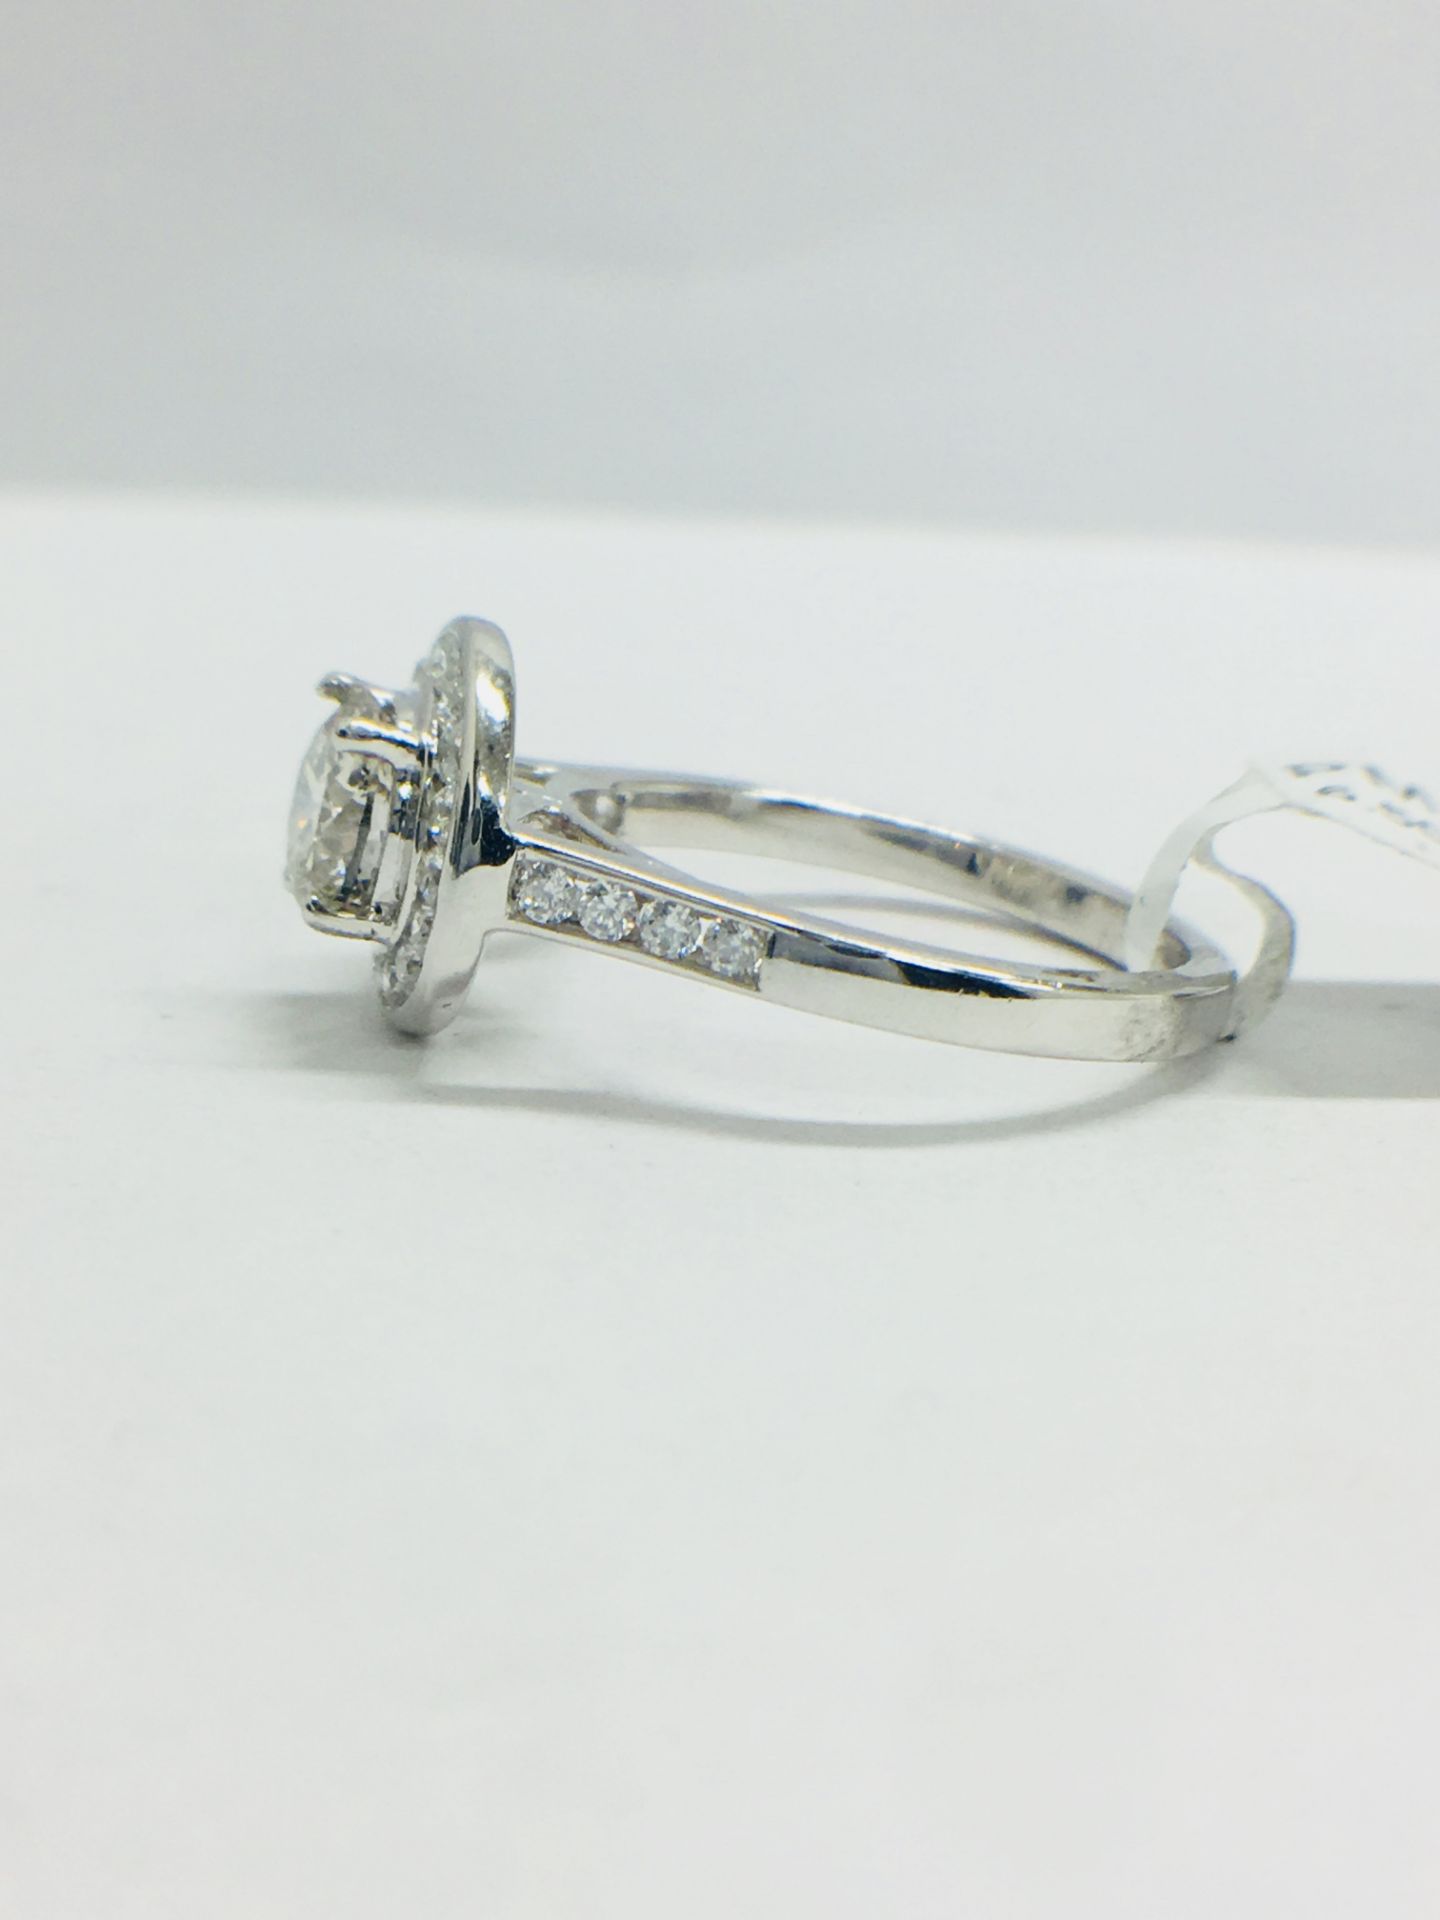 Platinum Channel set Halo style diamond ring,1.40ct diamond weight,centre 0.90ct,H colour - Image 3 of 8